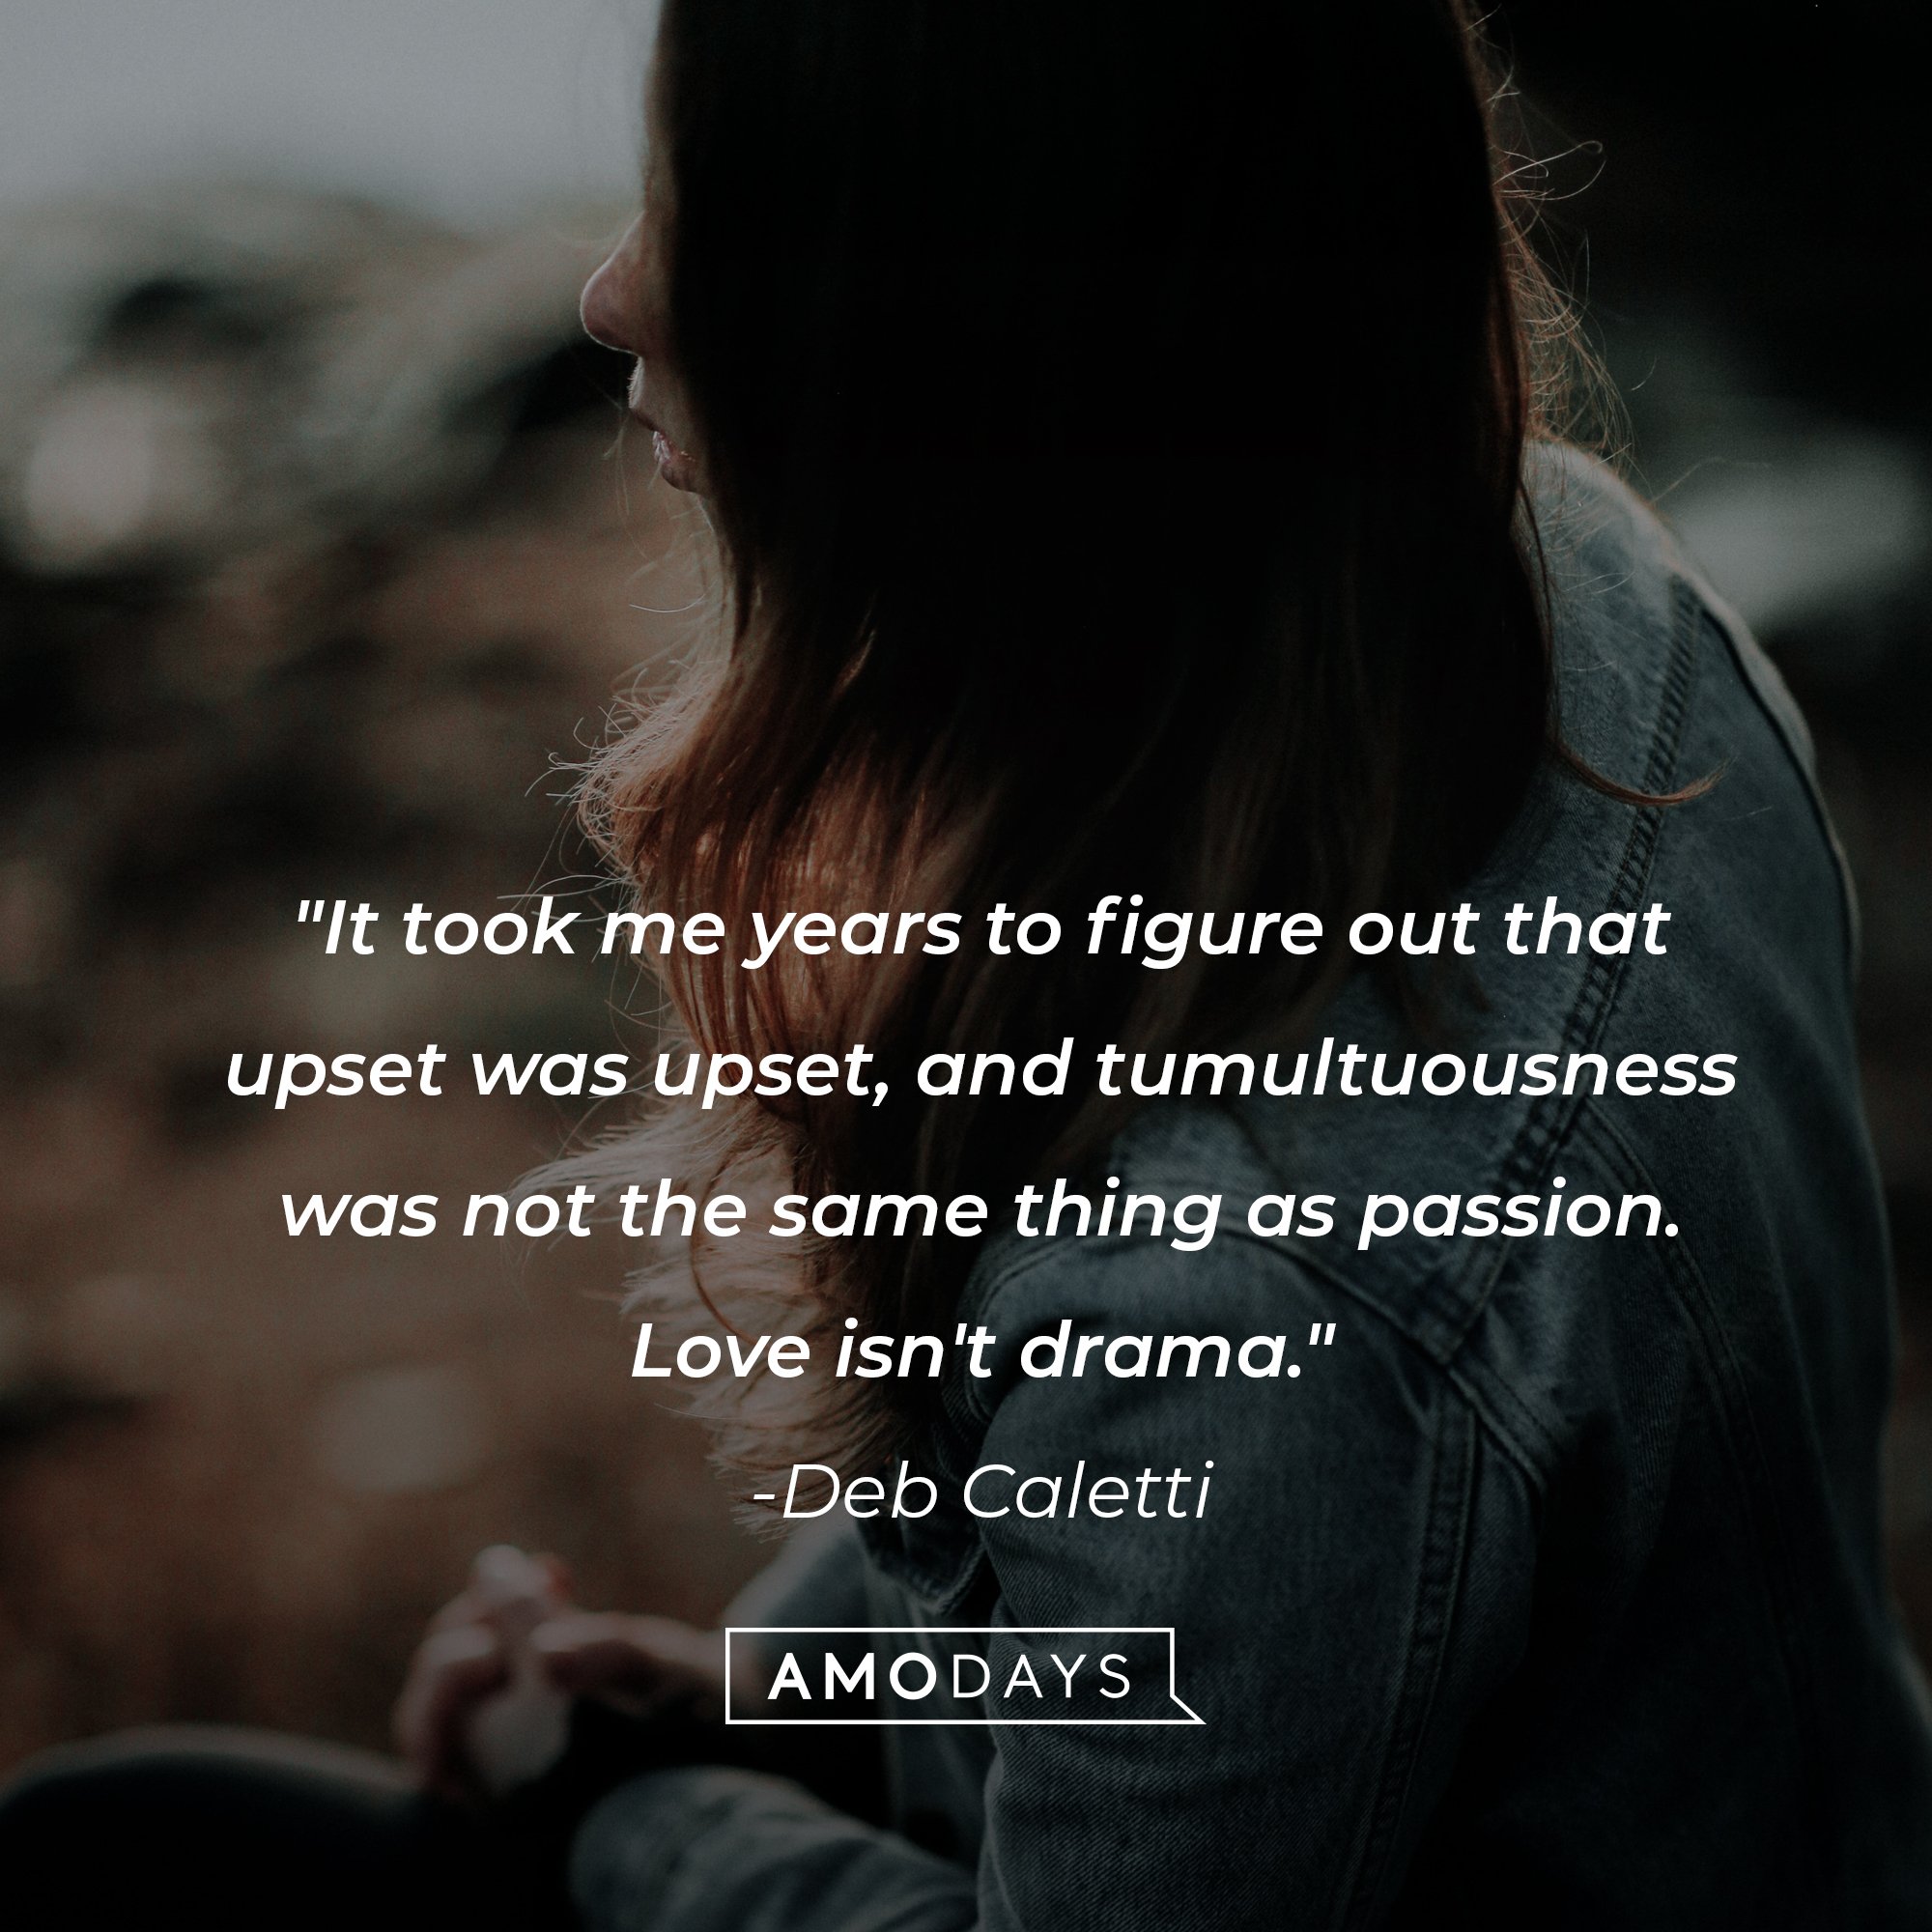 Deb Caletti’s quote: "It took me years to figure out that upset was upset, and tumultuousness was not the same thing as passion. Love isn't drama." | Image: AmoDays 